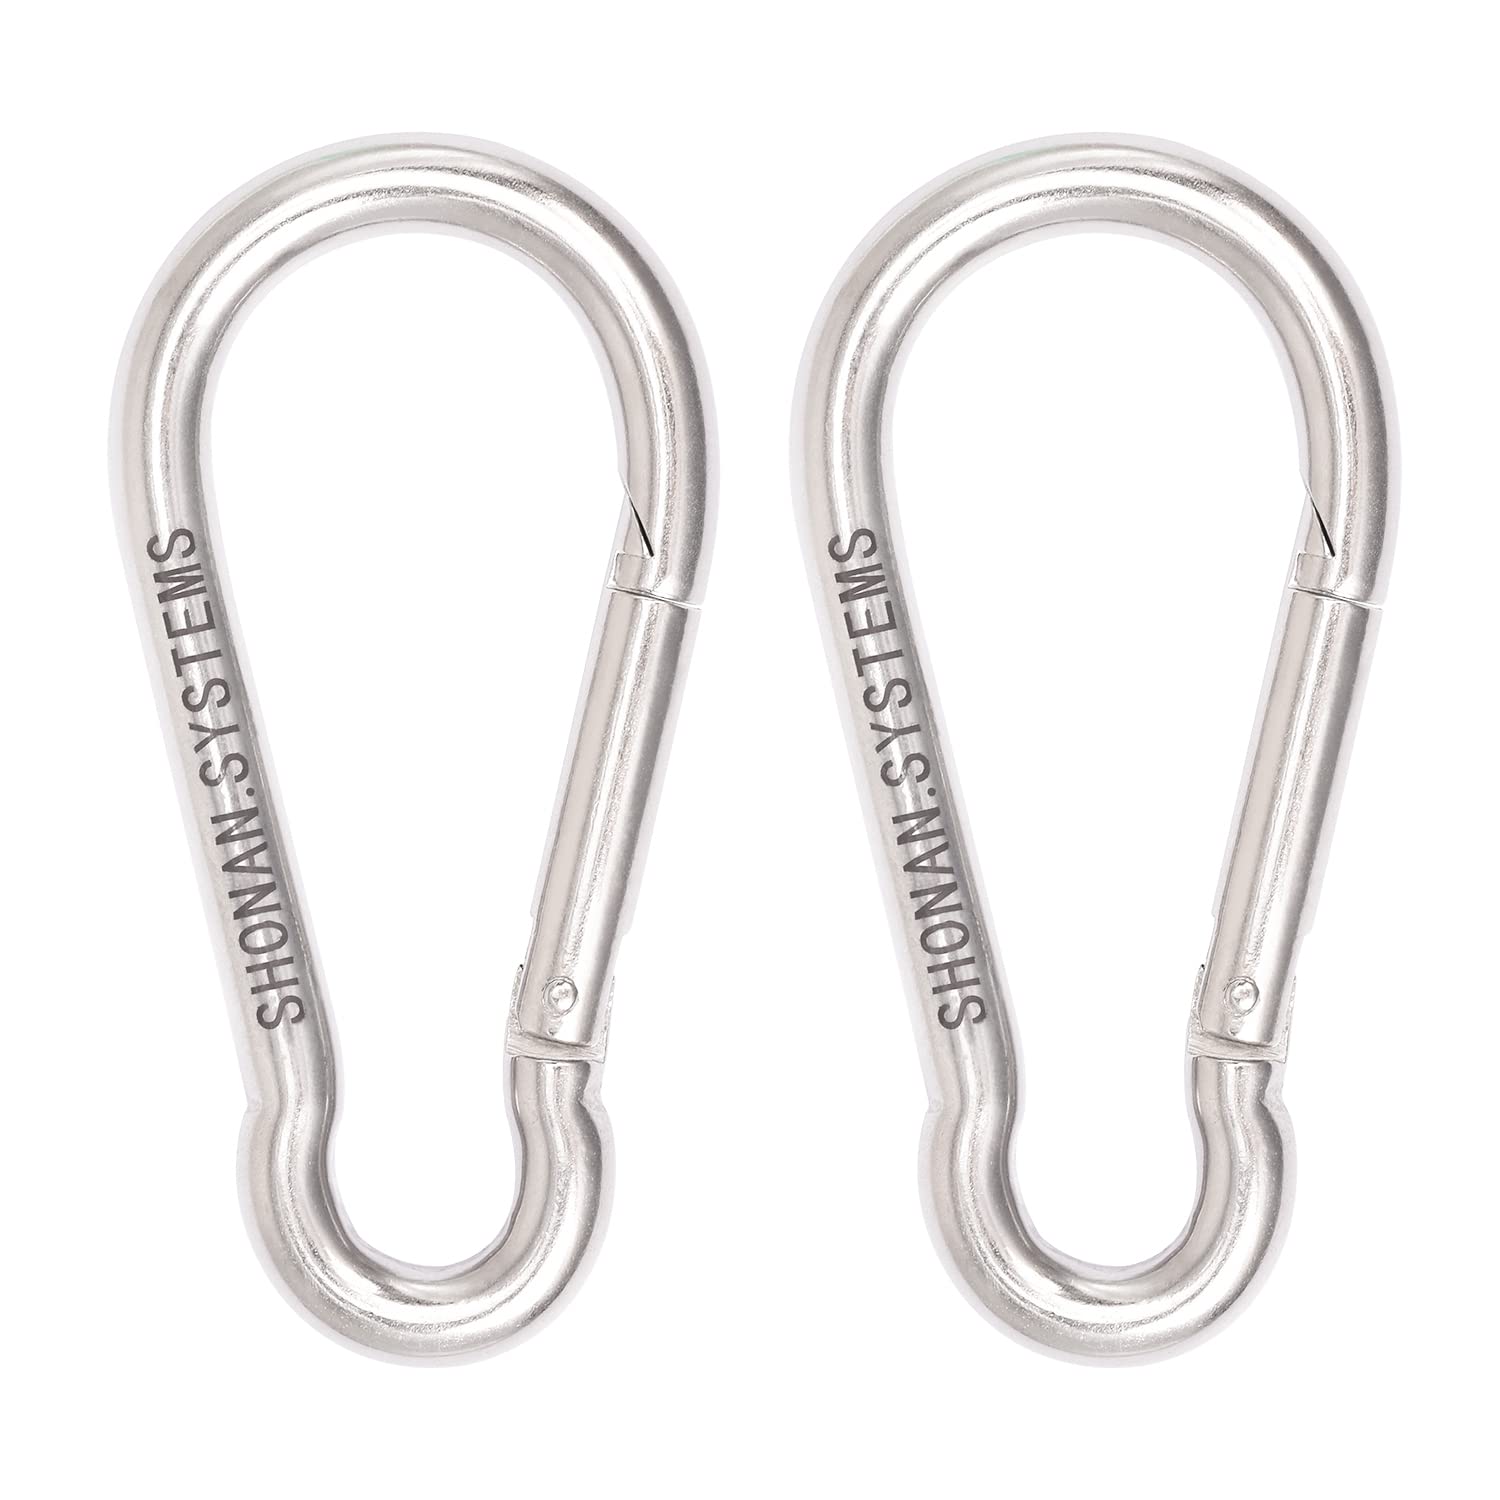 SHONAN.SYSTEMS 5.5 Inch Large Carabiner Clips- 2 Pack Heavy Duty Stainless  Steel Spring Snap Hooks